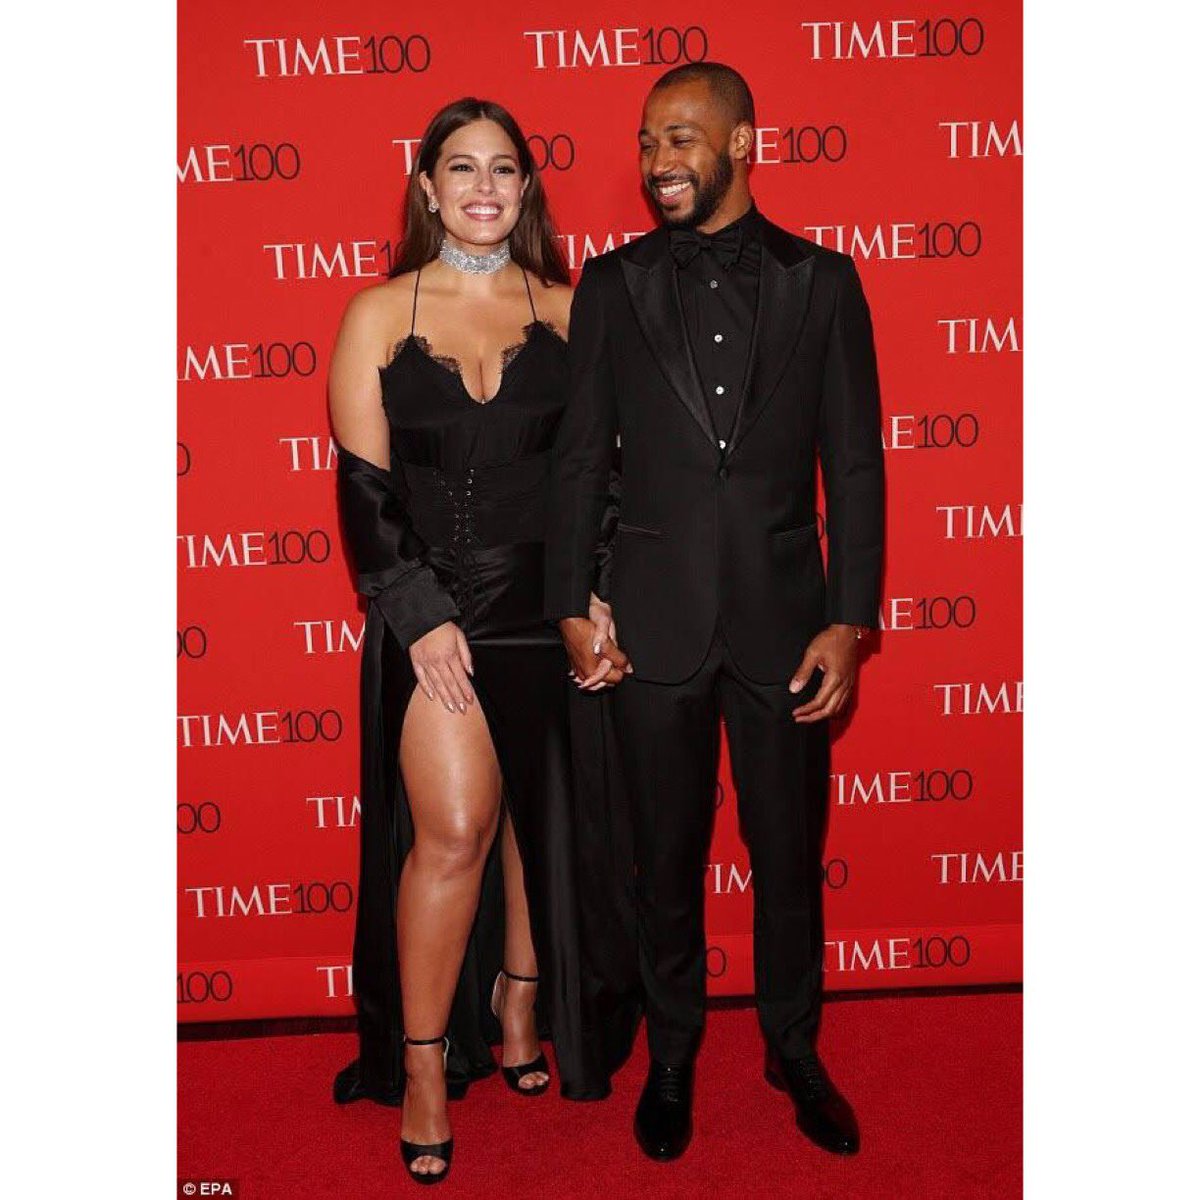 So honored to be a part of #TIME100 most influential of 2017. Last night was truly memorable! @TIME https://t.co/qpolyBILKR